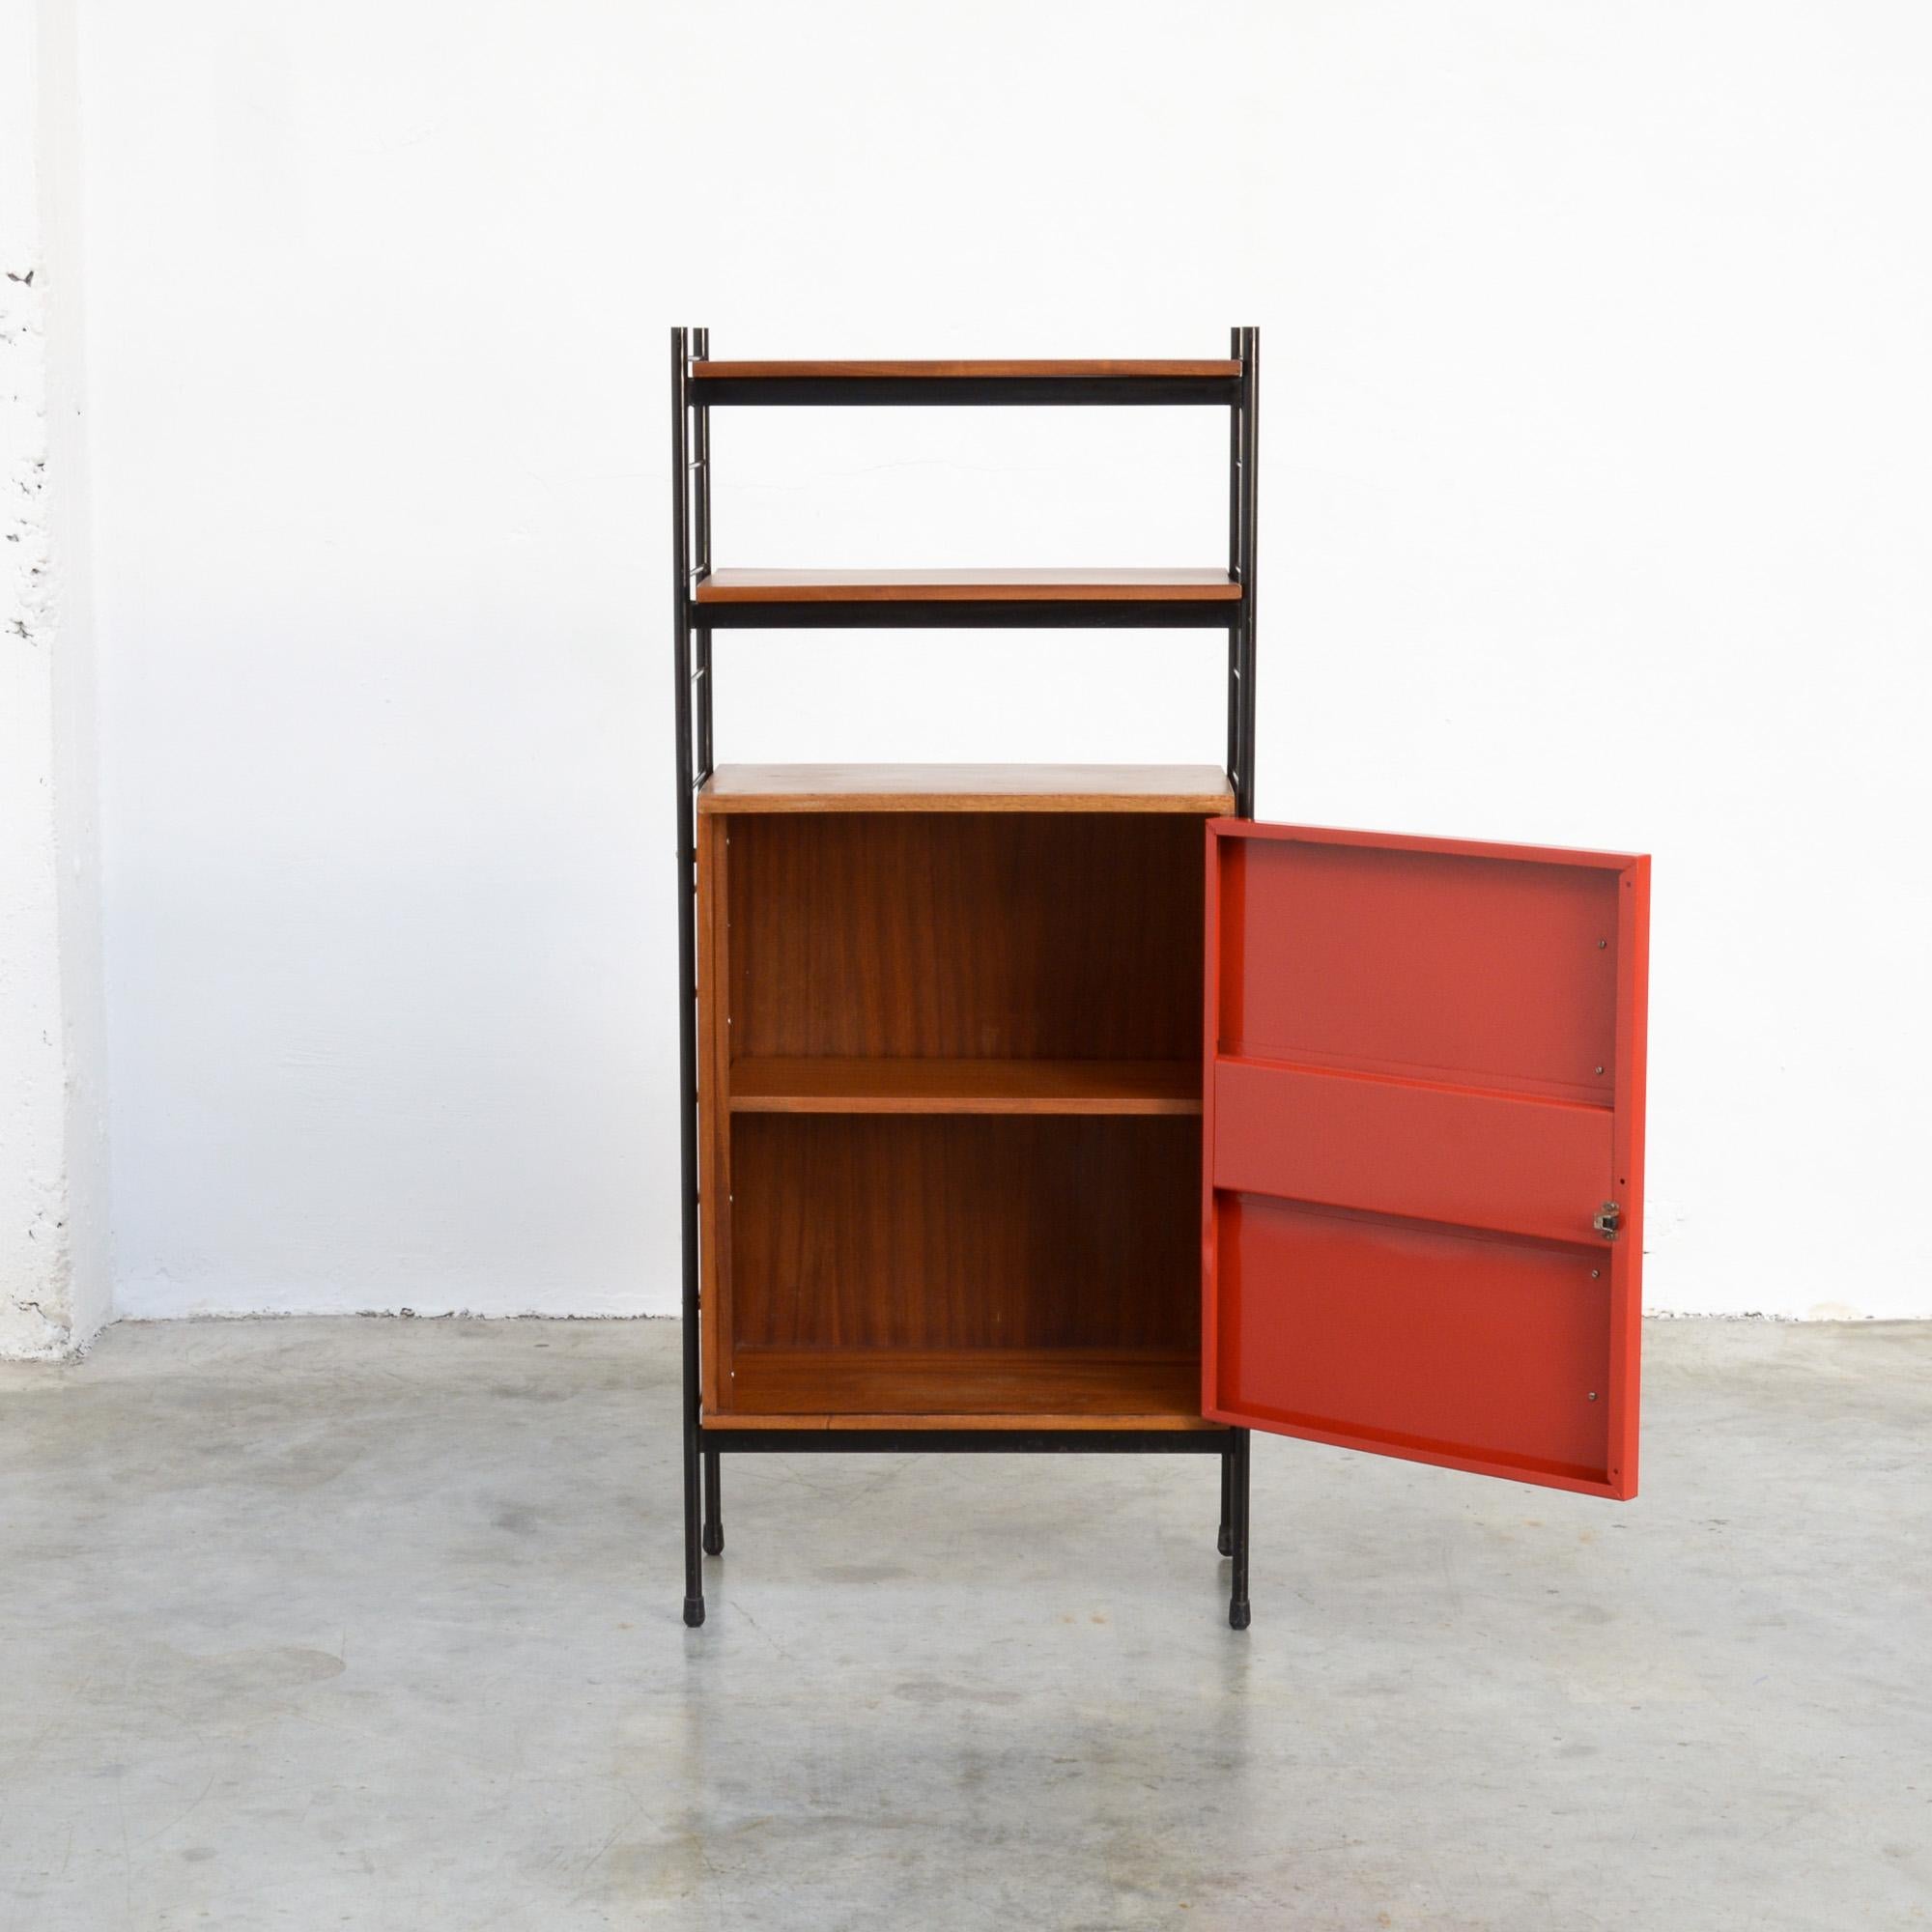 This rare cabinet was designed by Willy Van Der Meeren for Tubax in the early 1950s.
The open black lacquered metal frame holds 2 wooden shelves and a small cabinet with a metal door. The metal door with its elegant wooden handle is red painted.